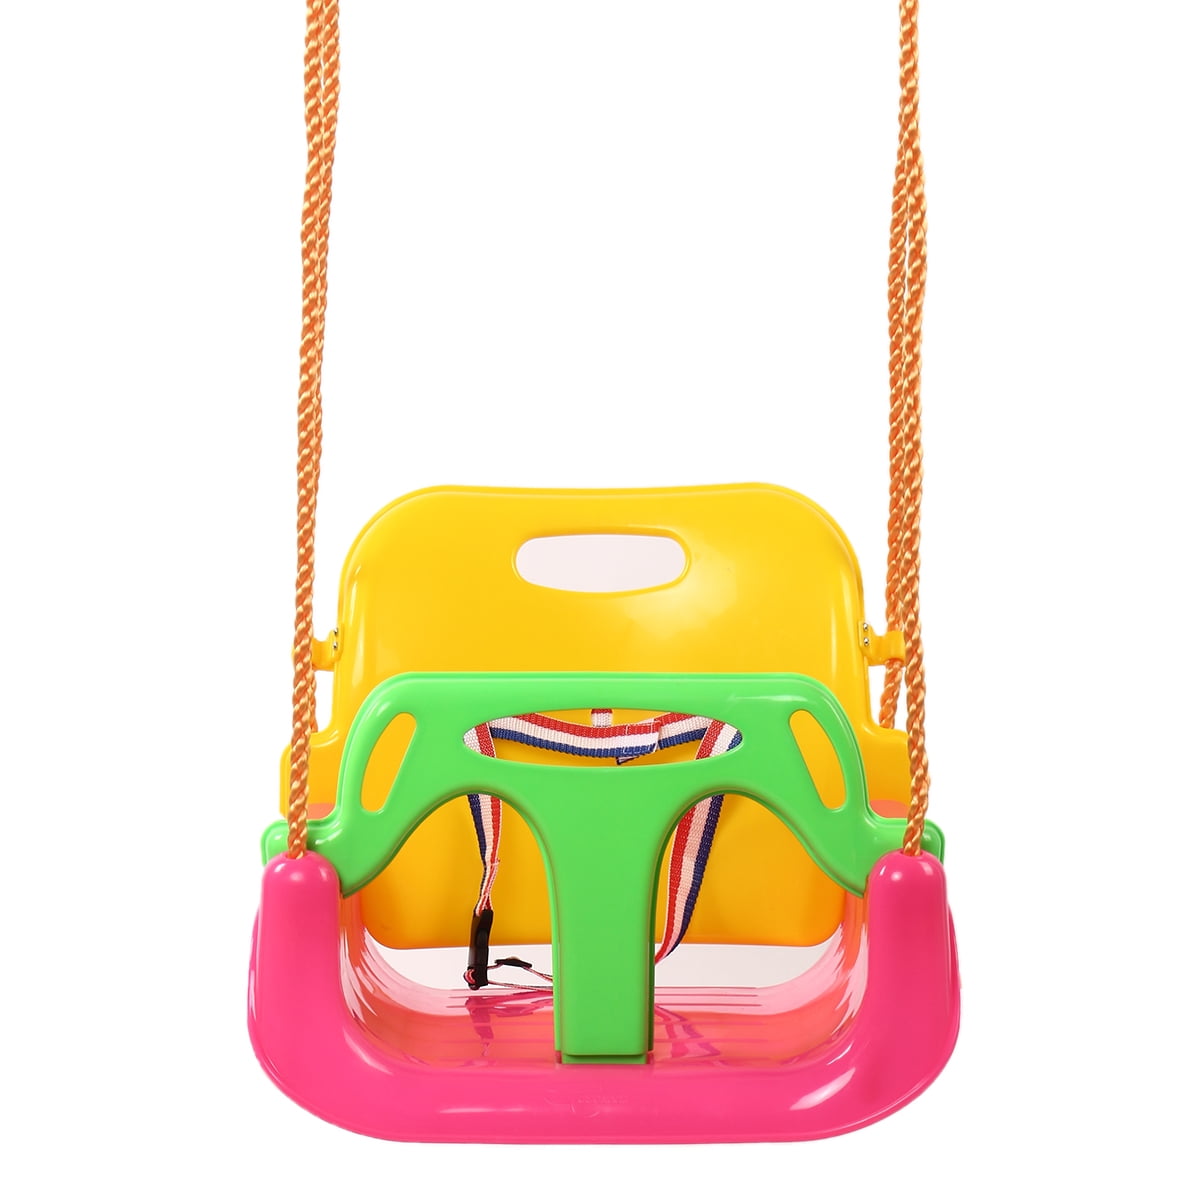 3 in 1 baby swing for infants babies